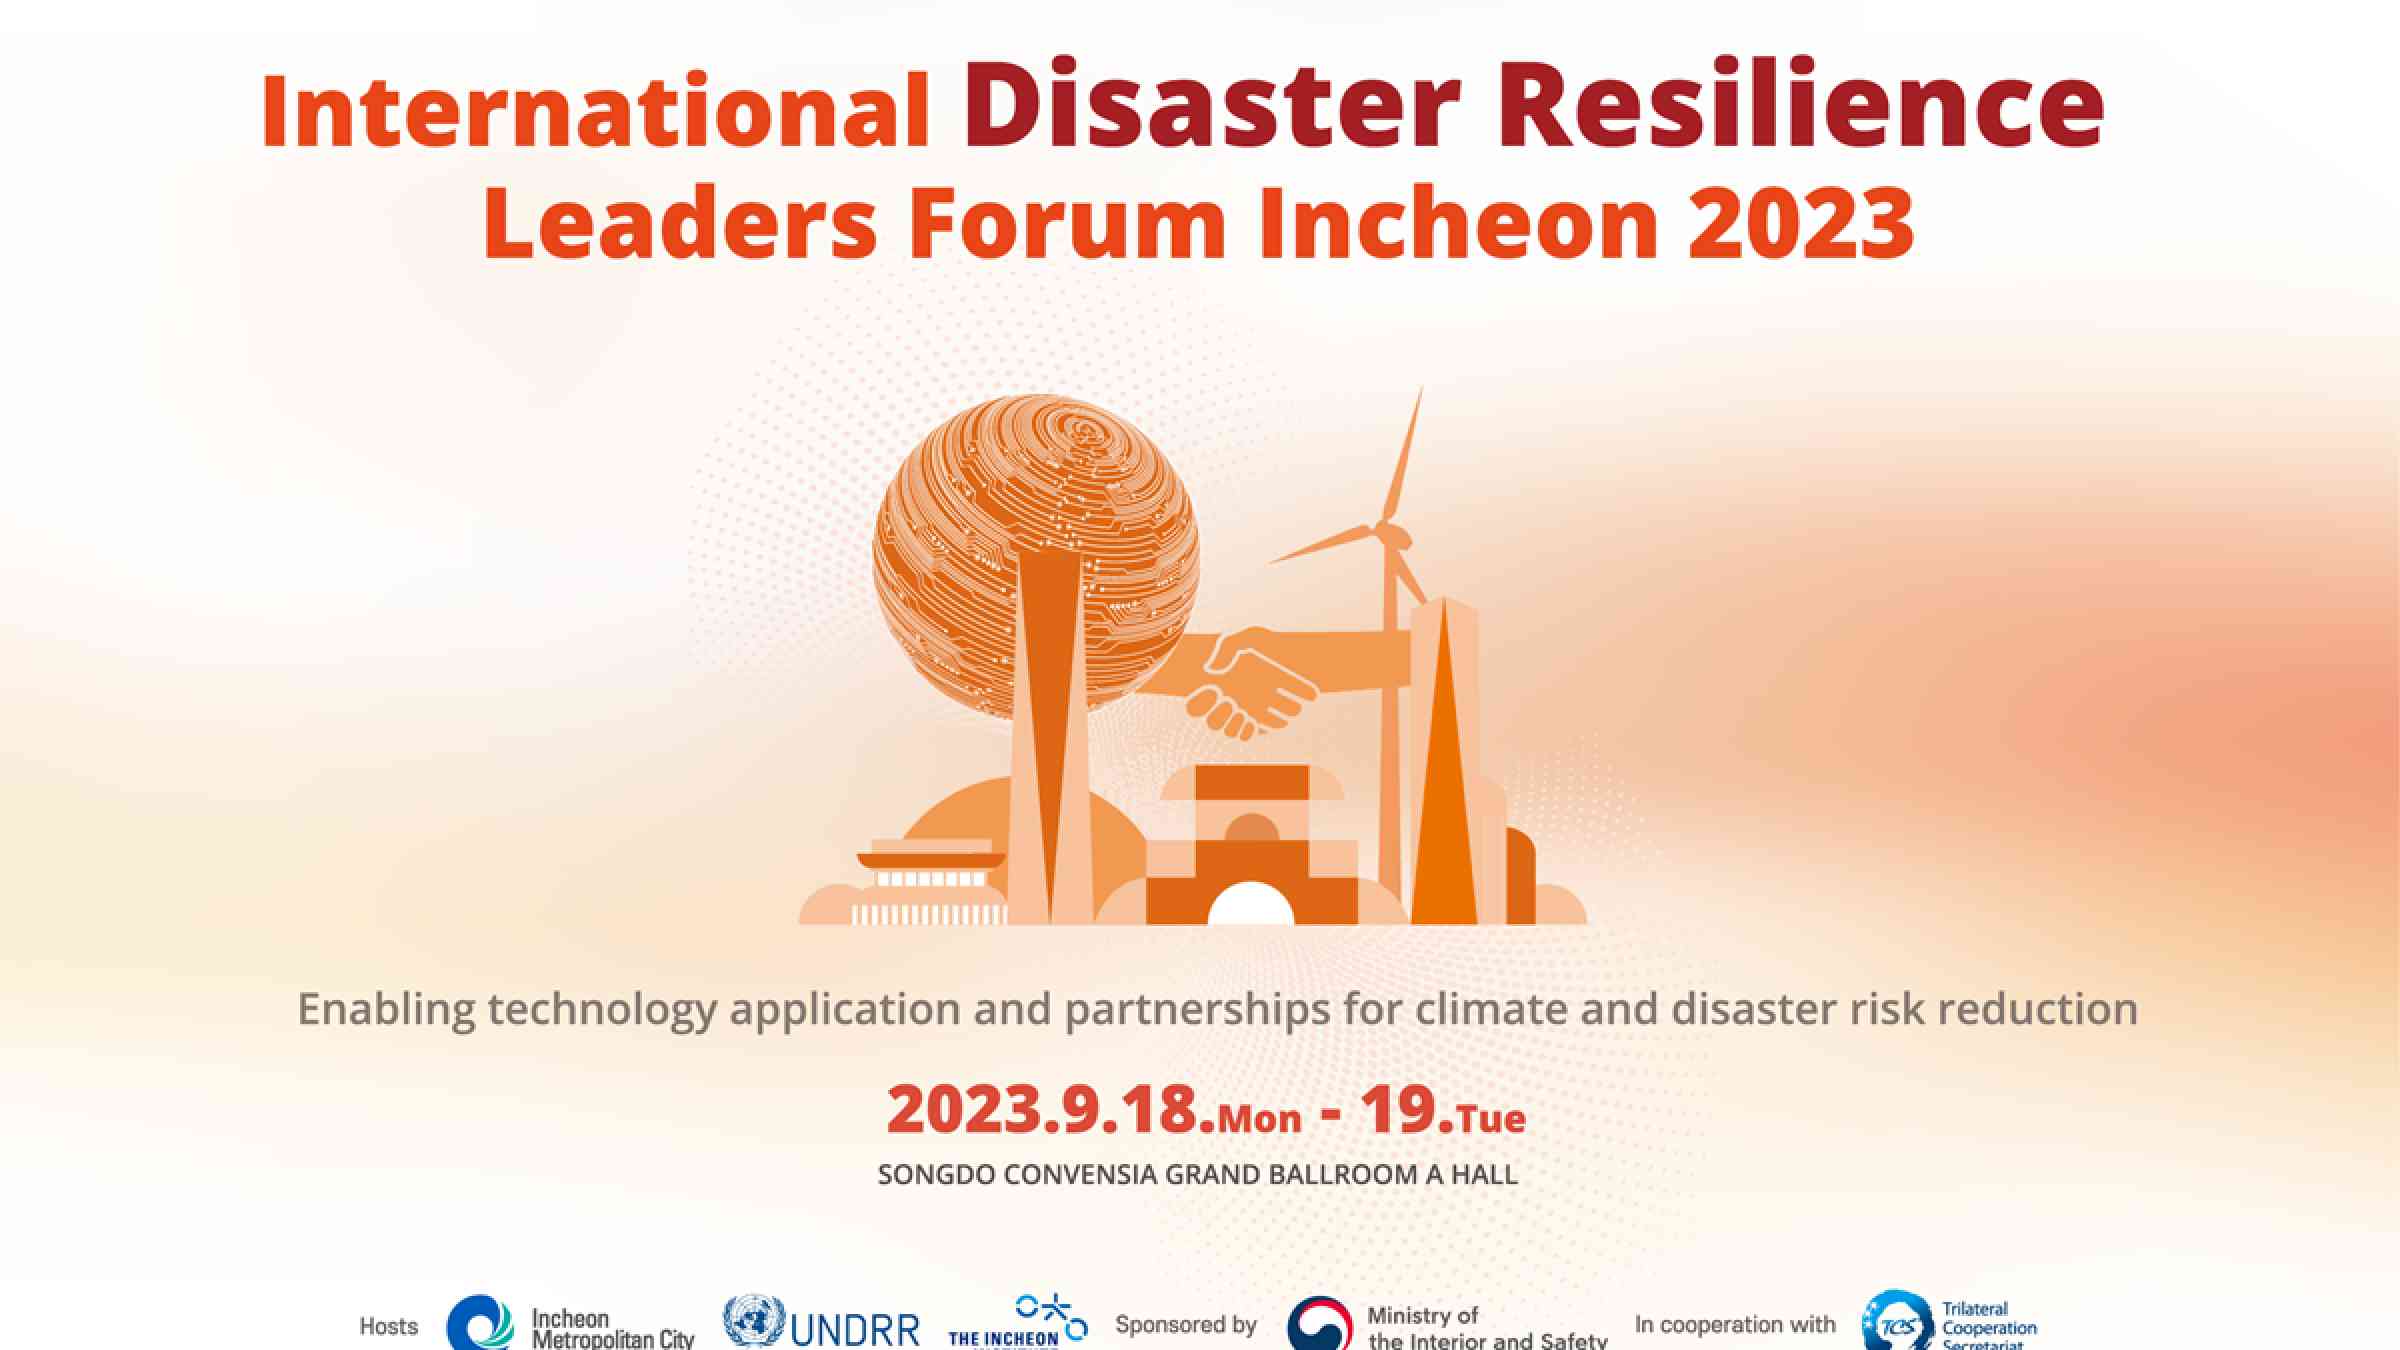 Banner for International Disaster Resilience Leaders Forum Incheon 2023